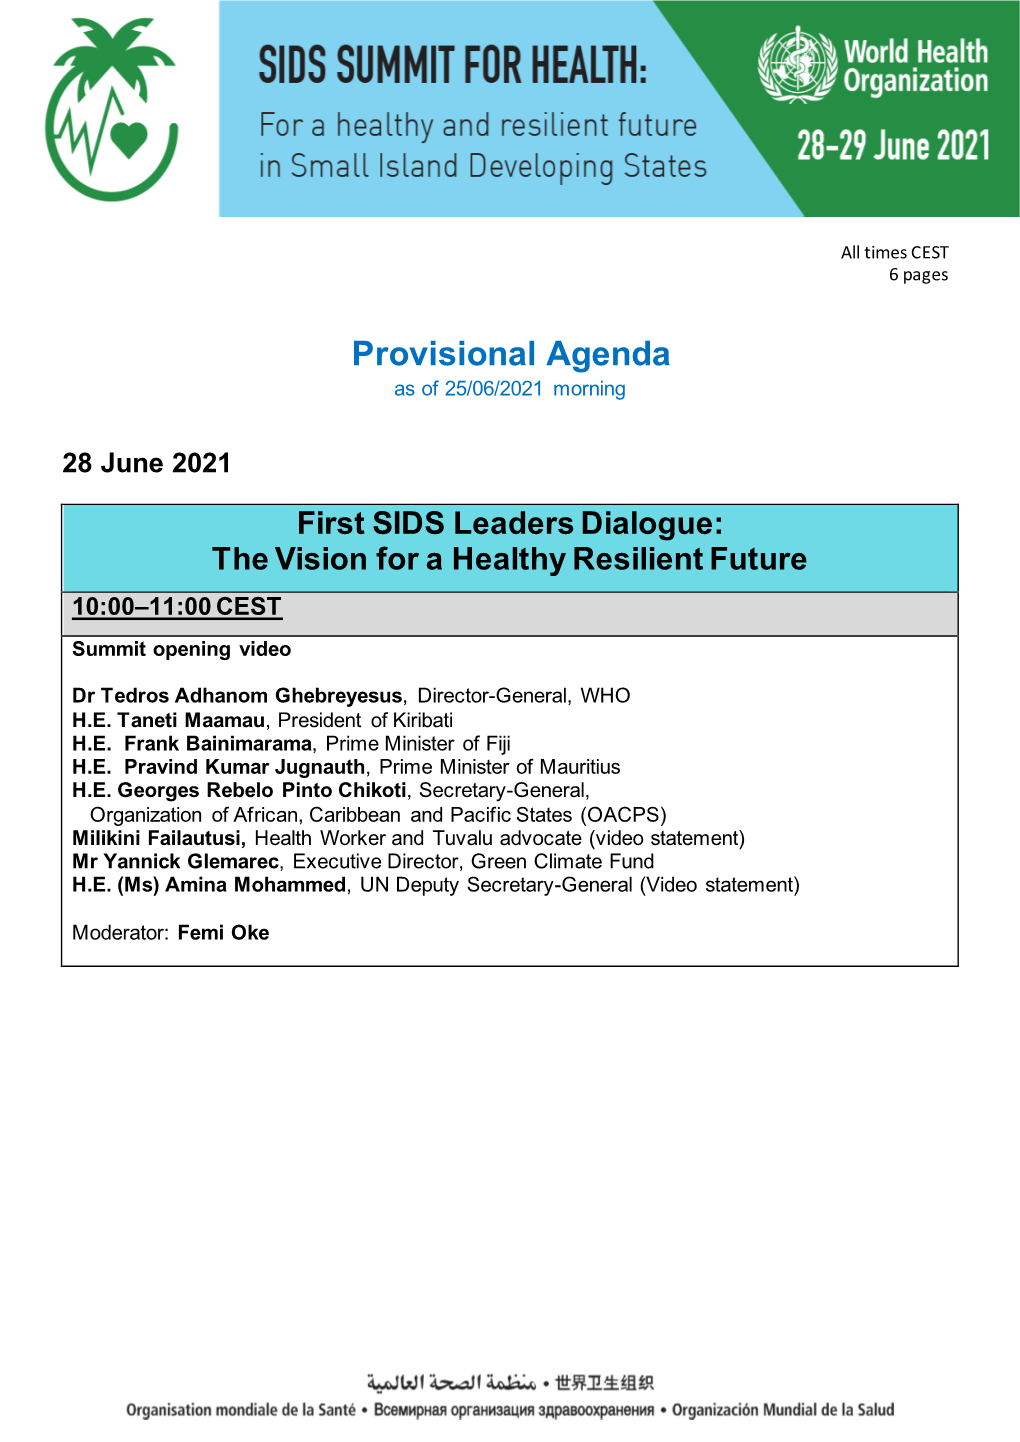 Provisional Agenda As of 25/06/2021 Morning